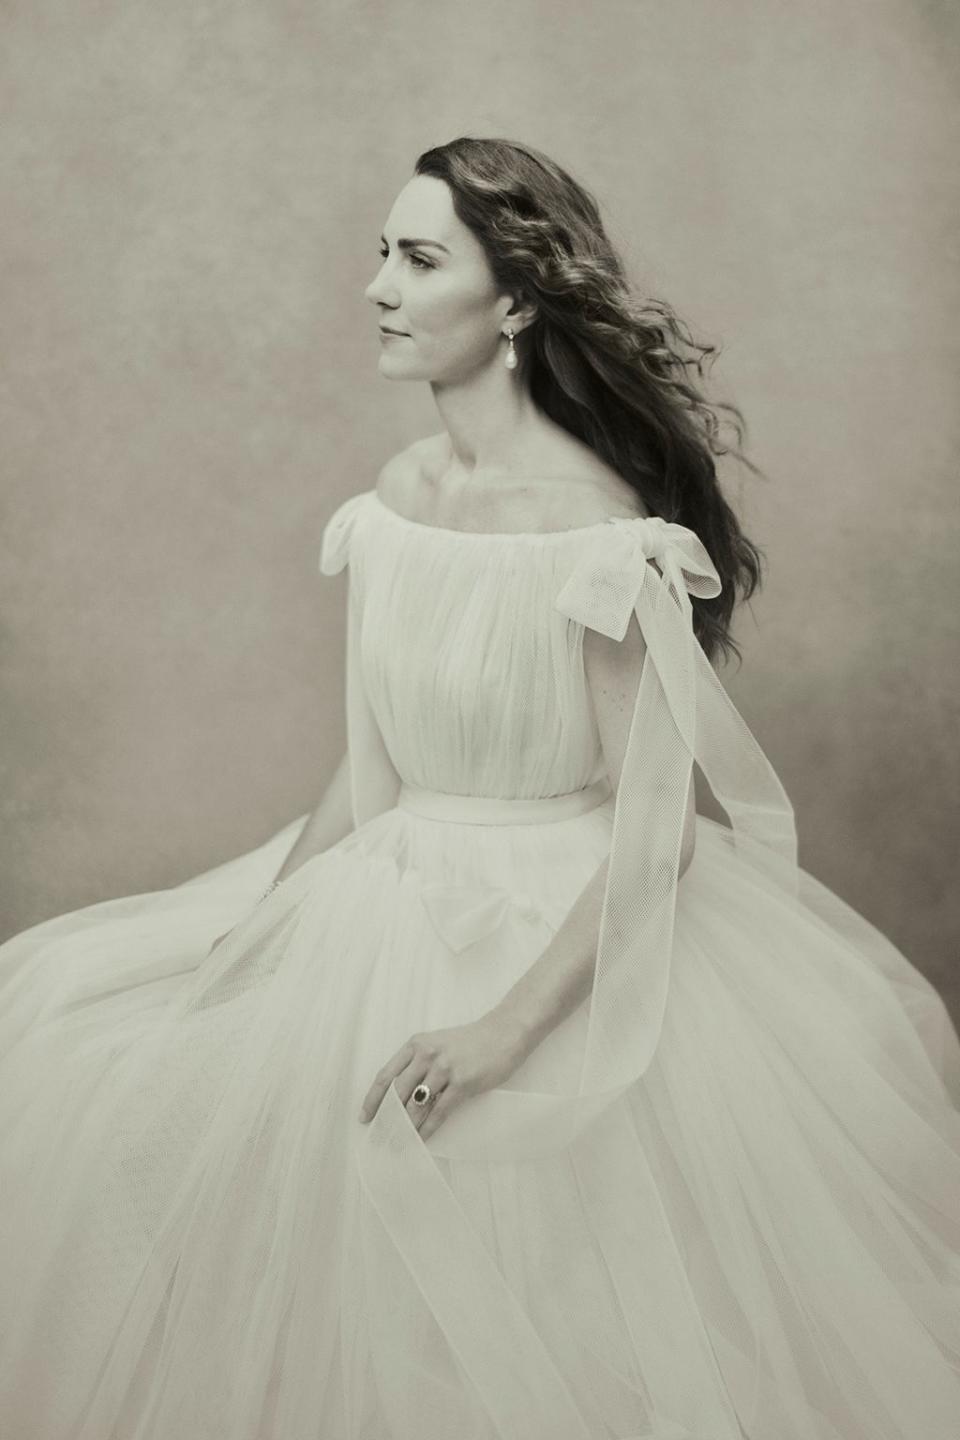 The pictures were taken at Kew Gardens in November (Paolo Roversi/PA)